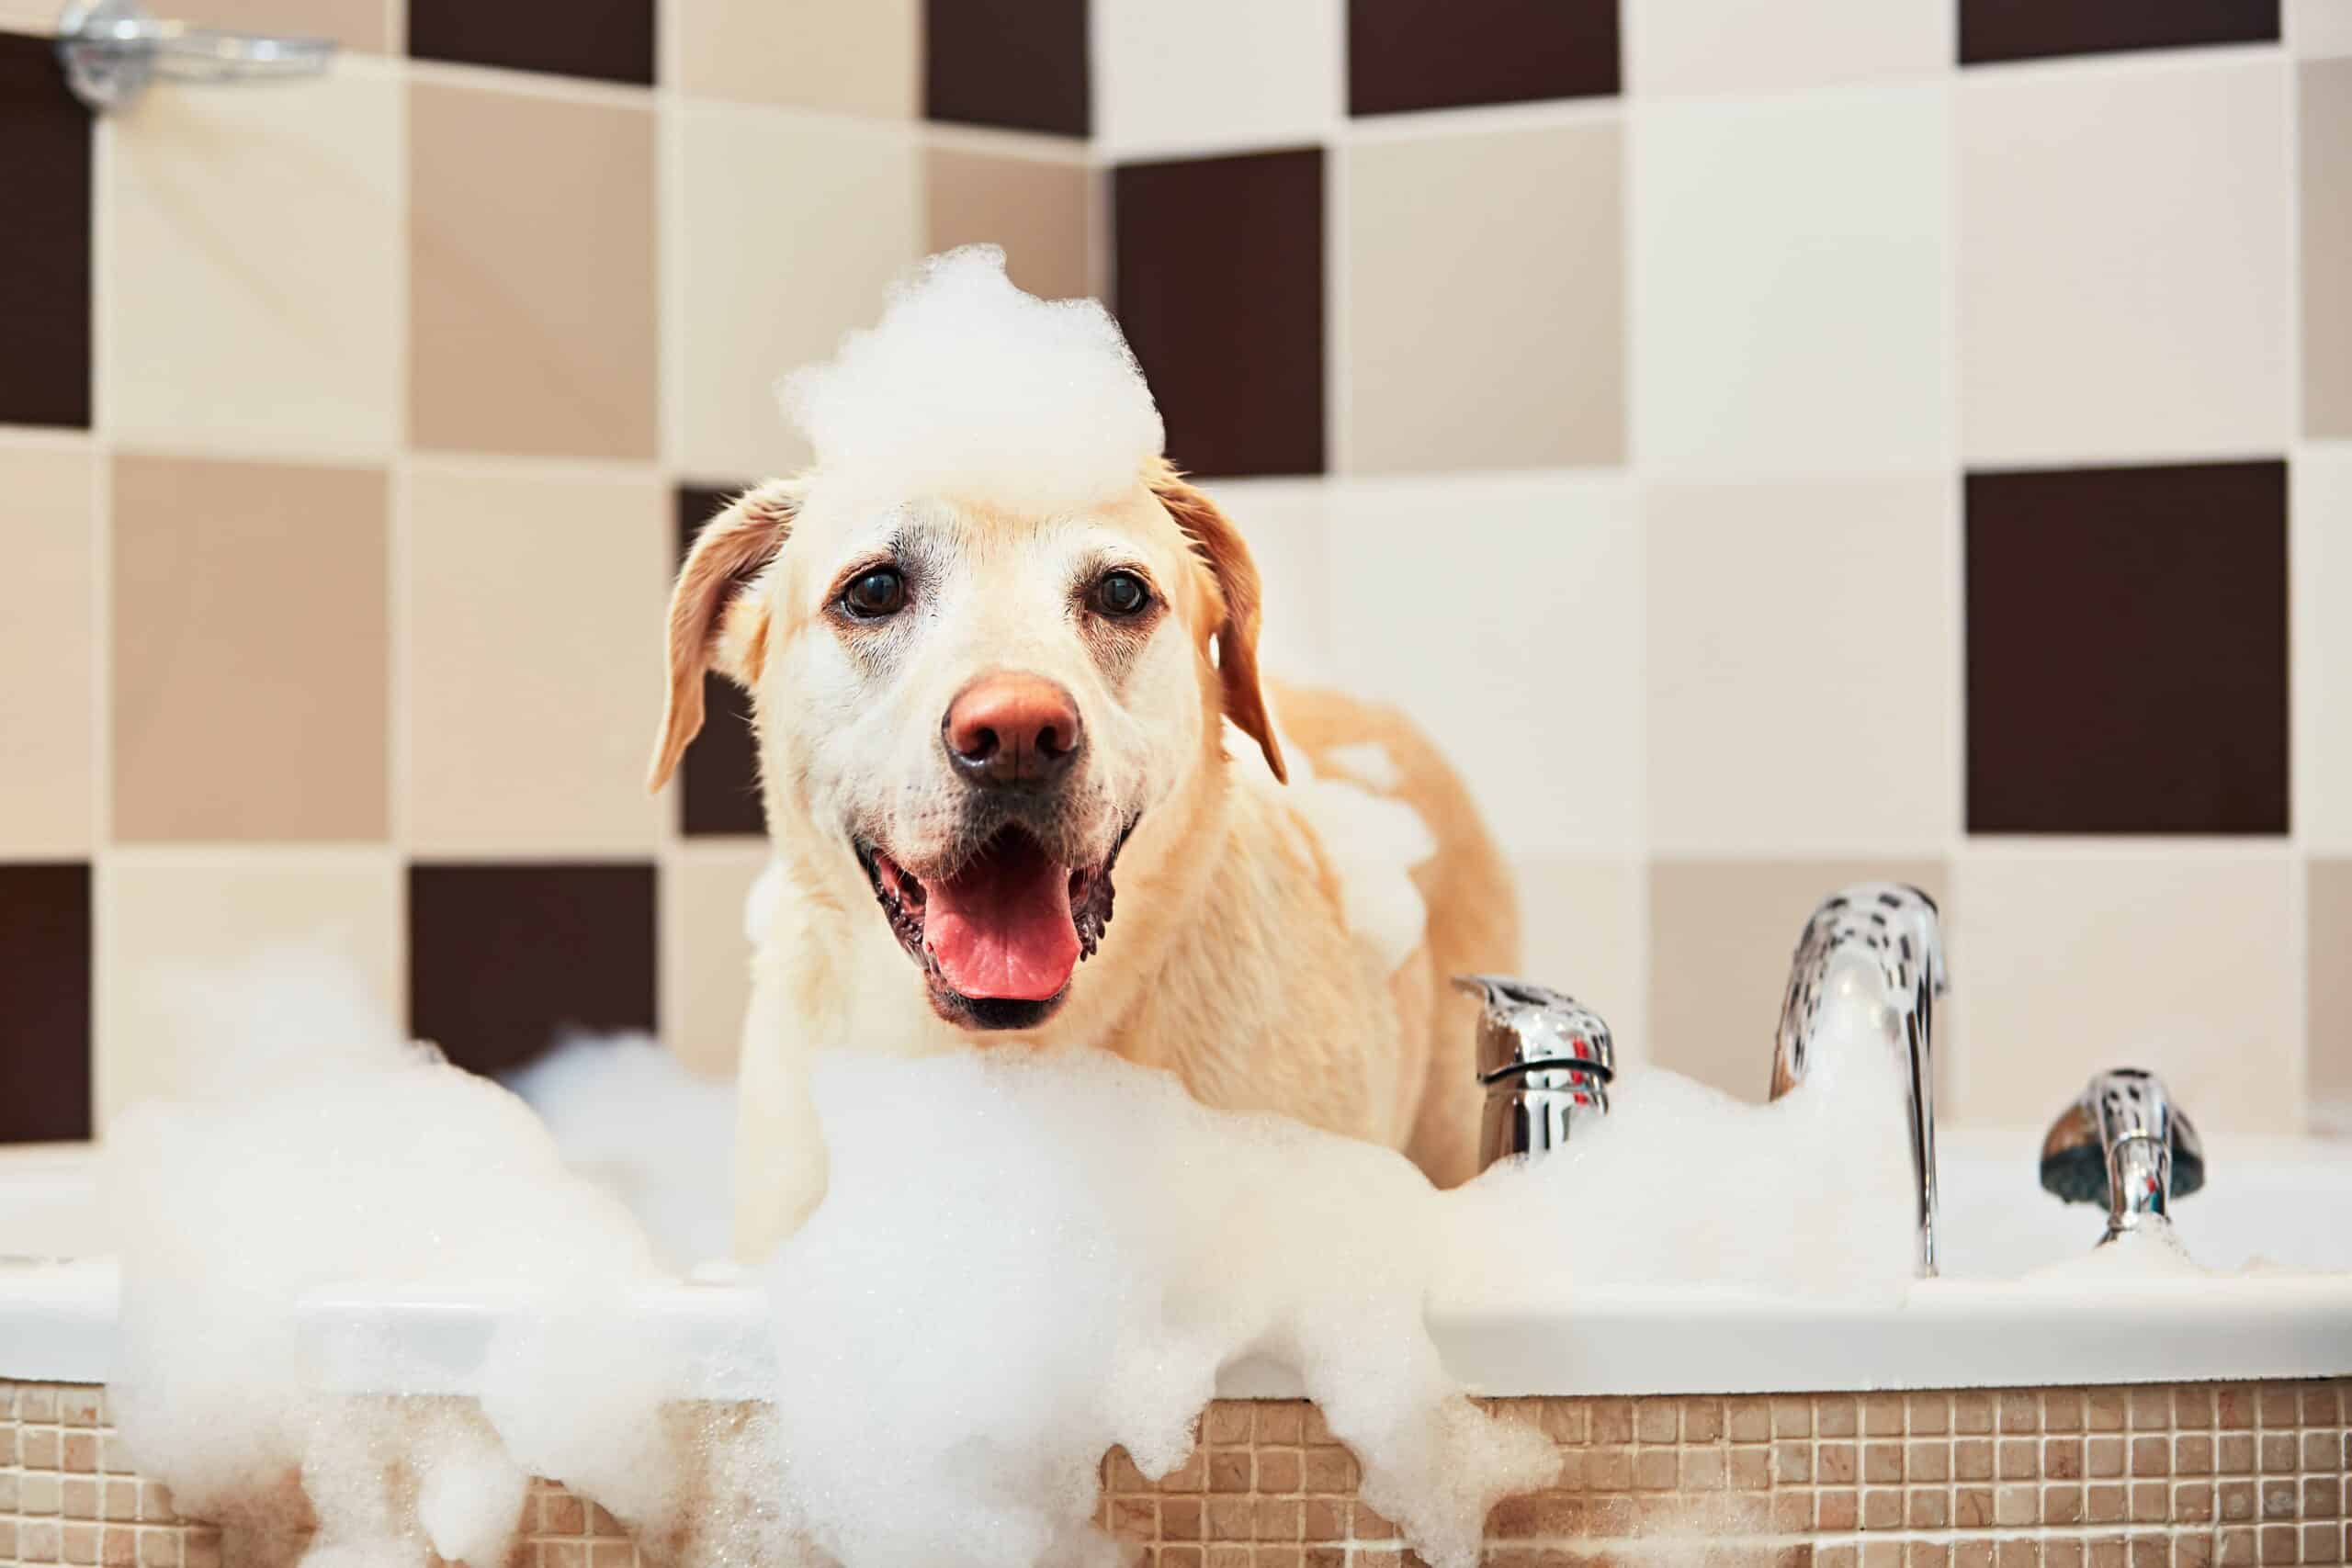 Can I let my dog air dry after a bath?